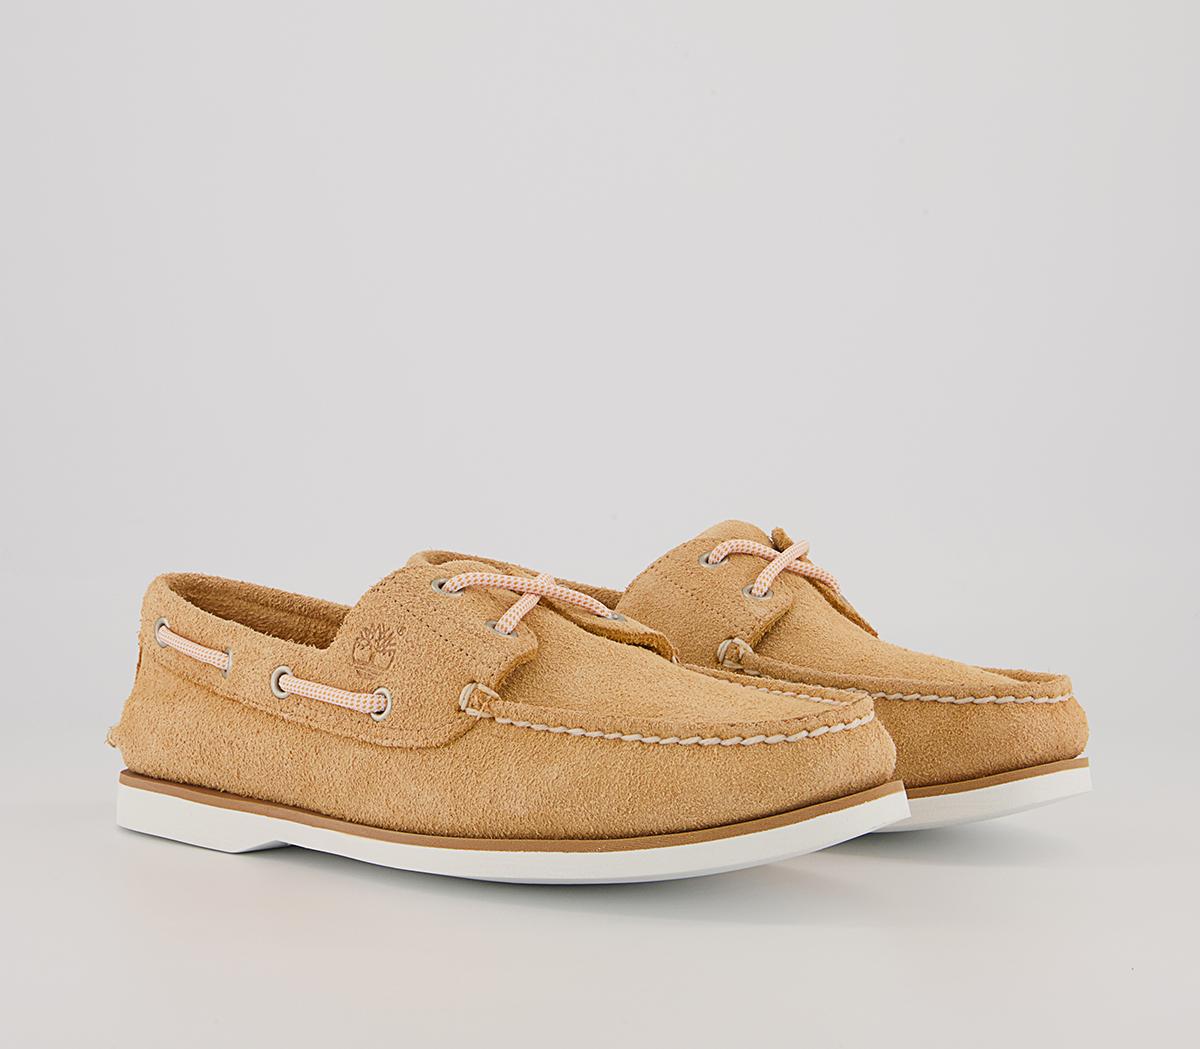 Timberland New Boat Shoes Light Orange Suede - Men's Casual Shoes